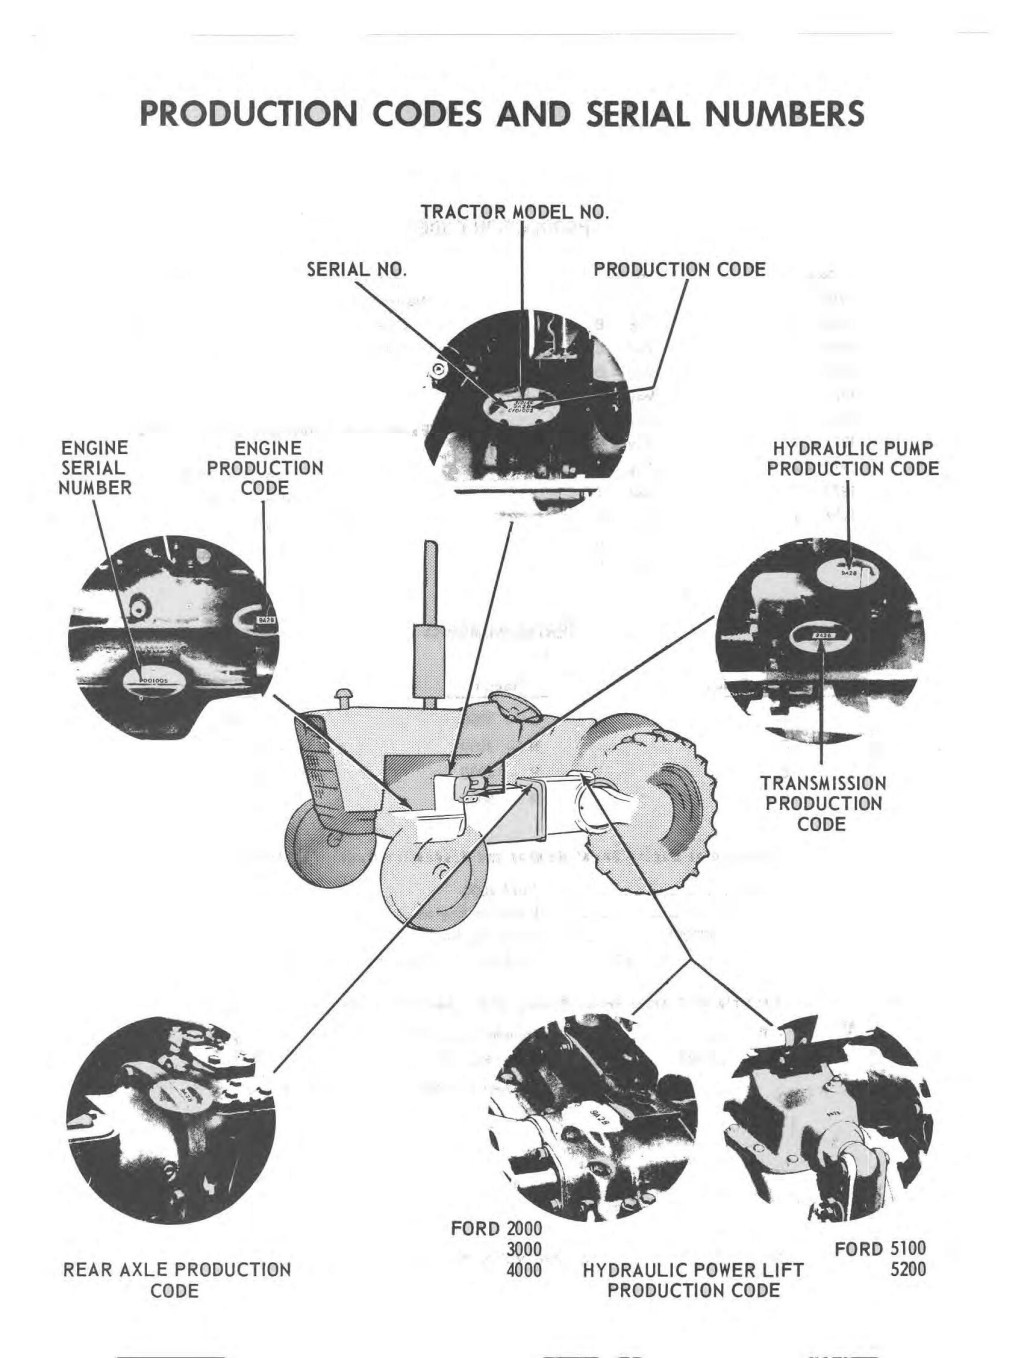 Picture of: Ford  Tractor Service Repair Manual by kmdisiodok – Issuu